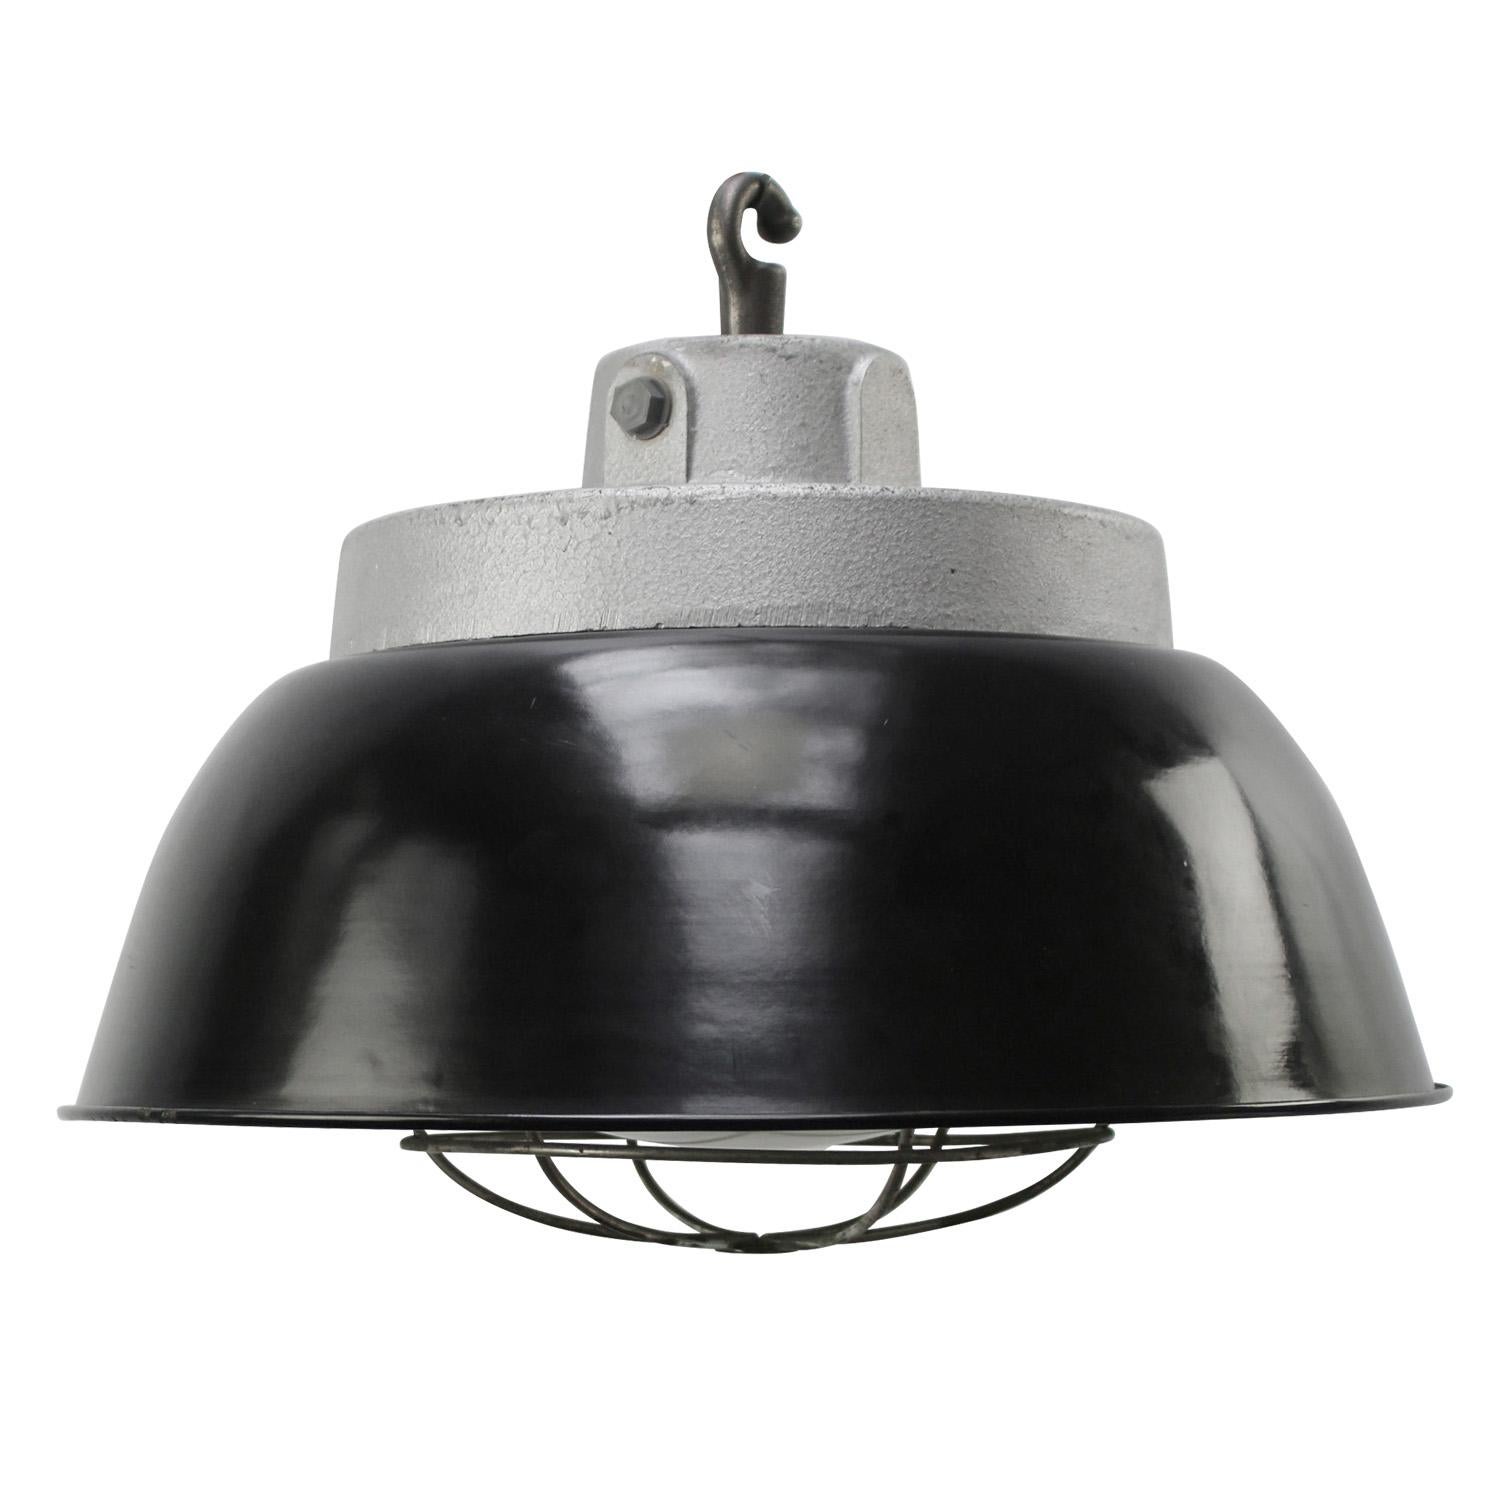 French black enamel vintage industrial pendant light
Cast iron top with clear glass and cage

Weight: 8.10 kg / 17.9 lb

Priced per individual item. All lamps have been made suitable by international standards for incandescent light bulbs,